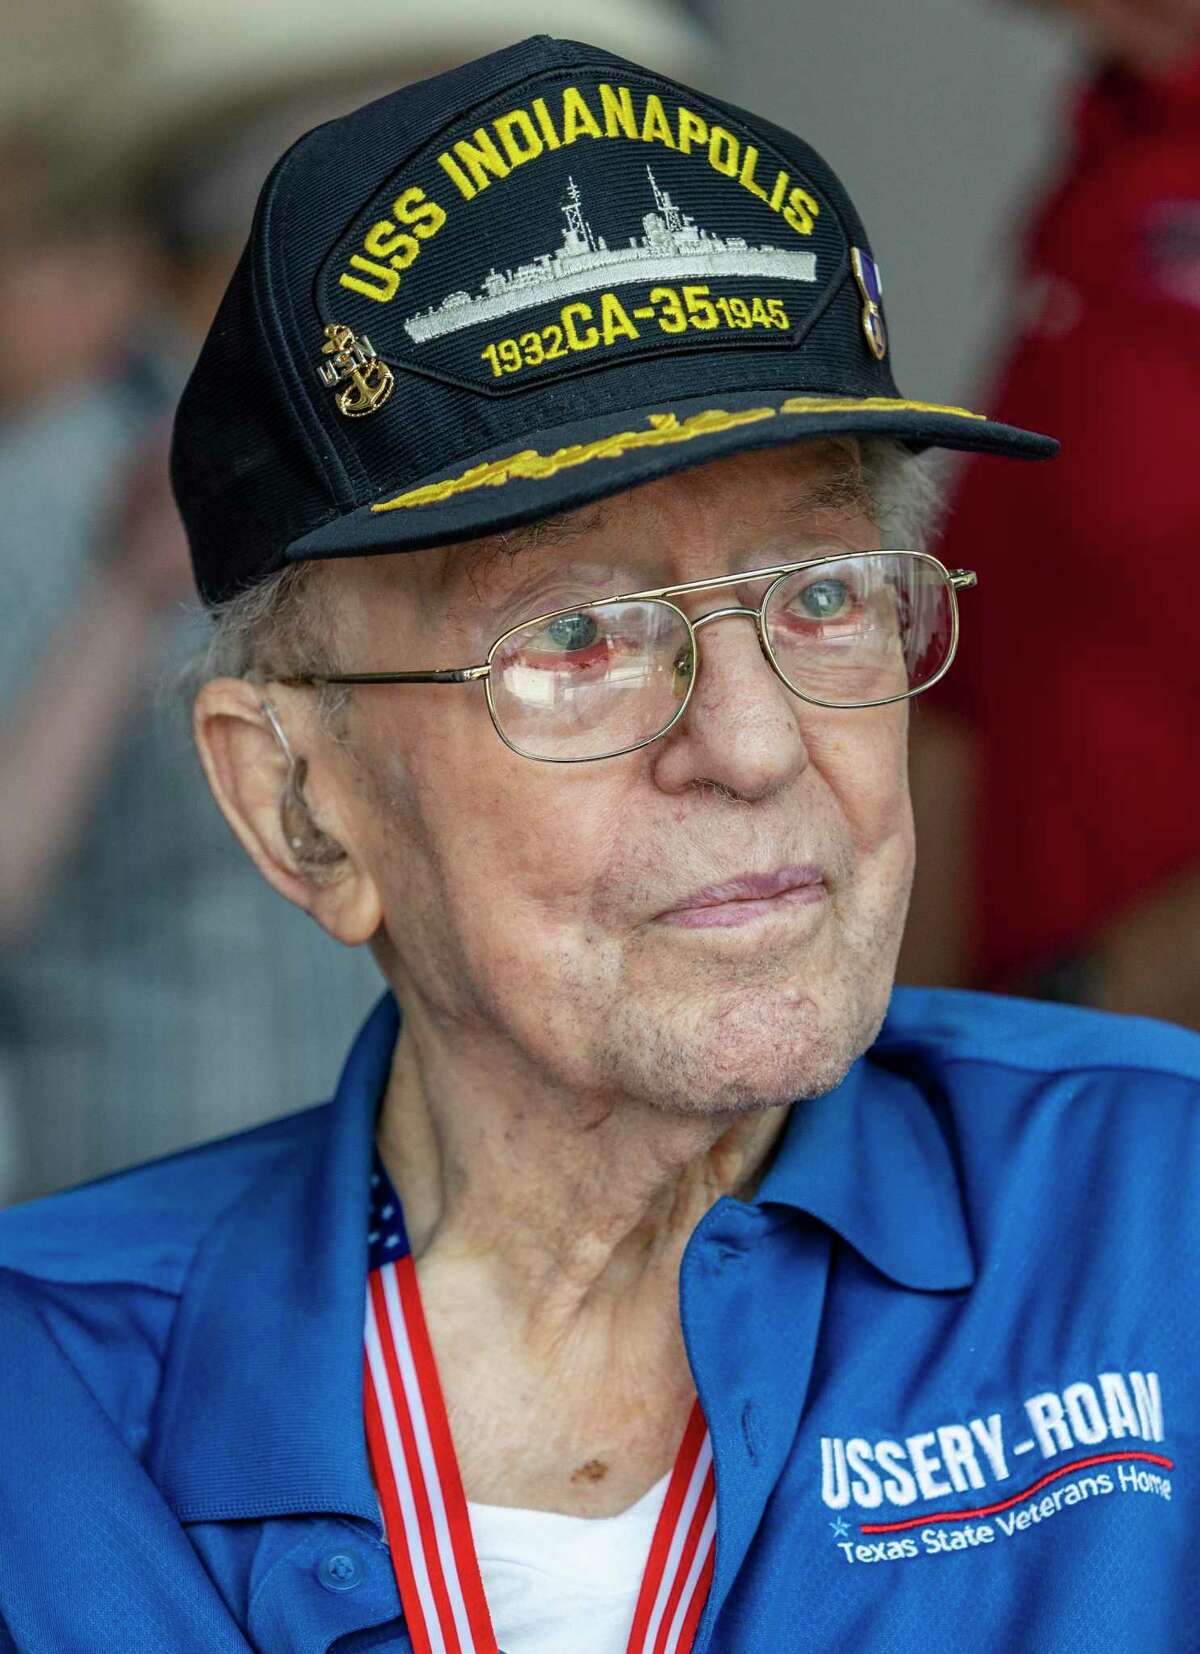 USS Indianapolis survivor Cleatus Lebow is one of the last two surviving crew members of the USS Indianapolis which was sunk July 30, 1945 after being struck by two Japanese torpedoes.